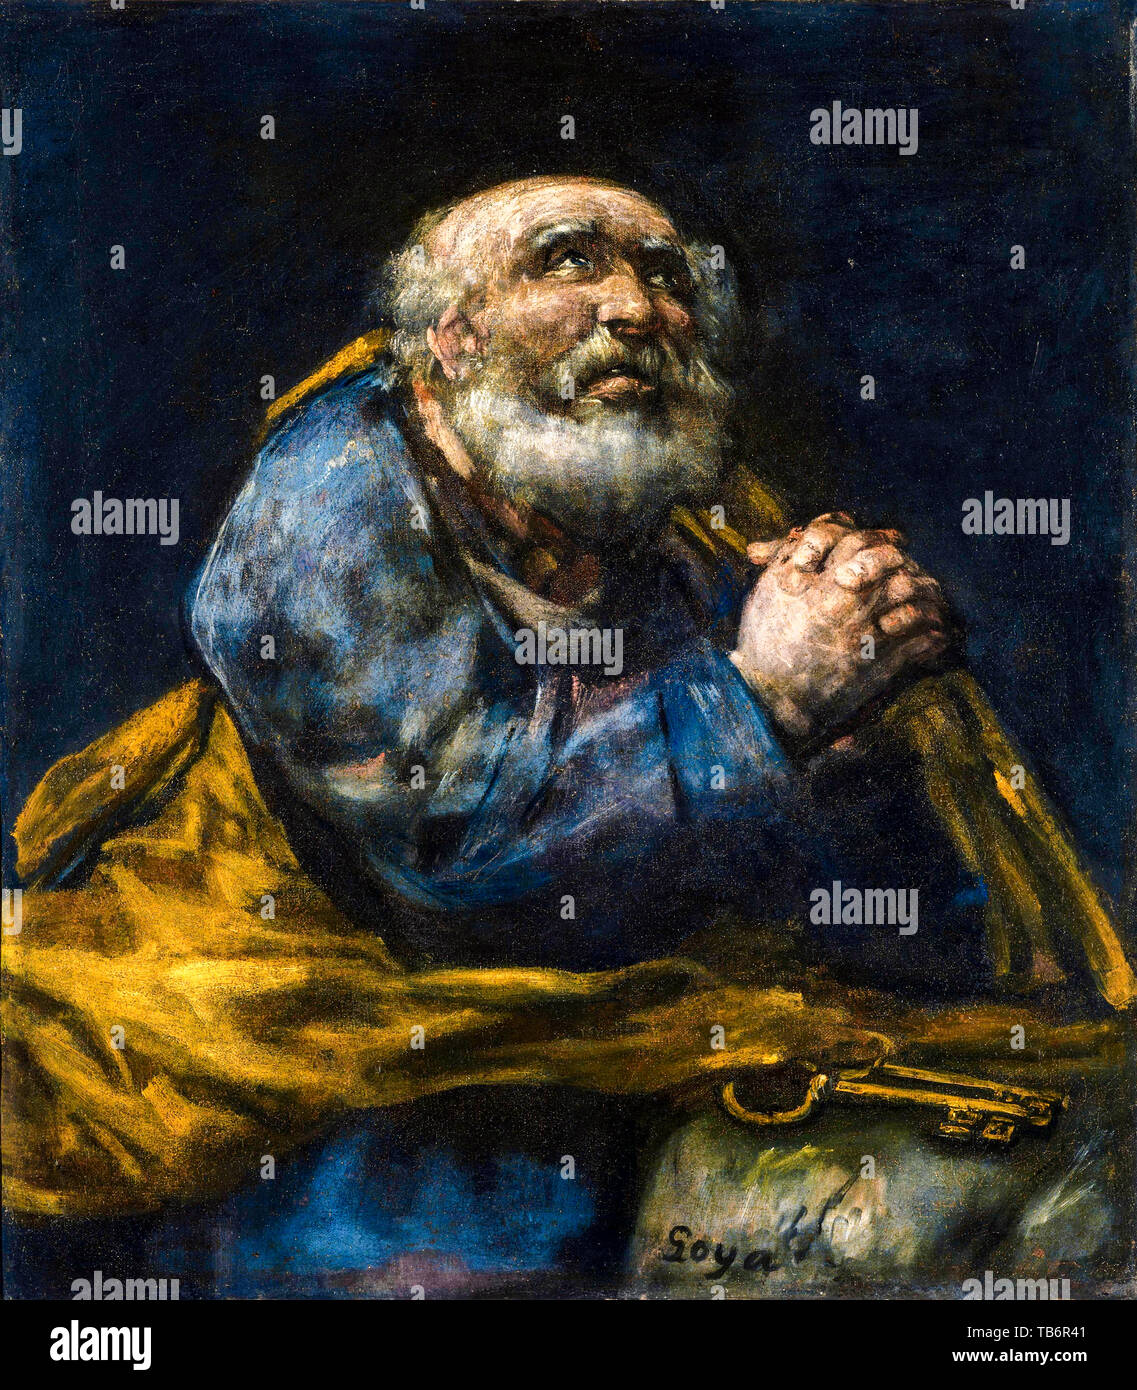 Francisco Goya, The Repentant St. Peter, portrait painting, circa 1820 Stock Photo